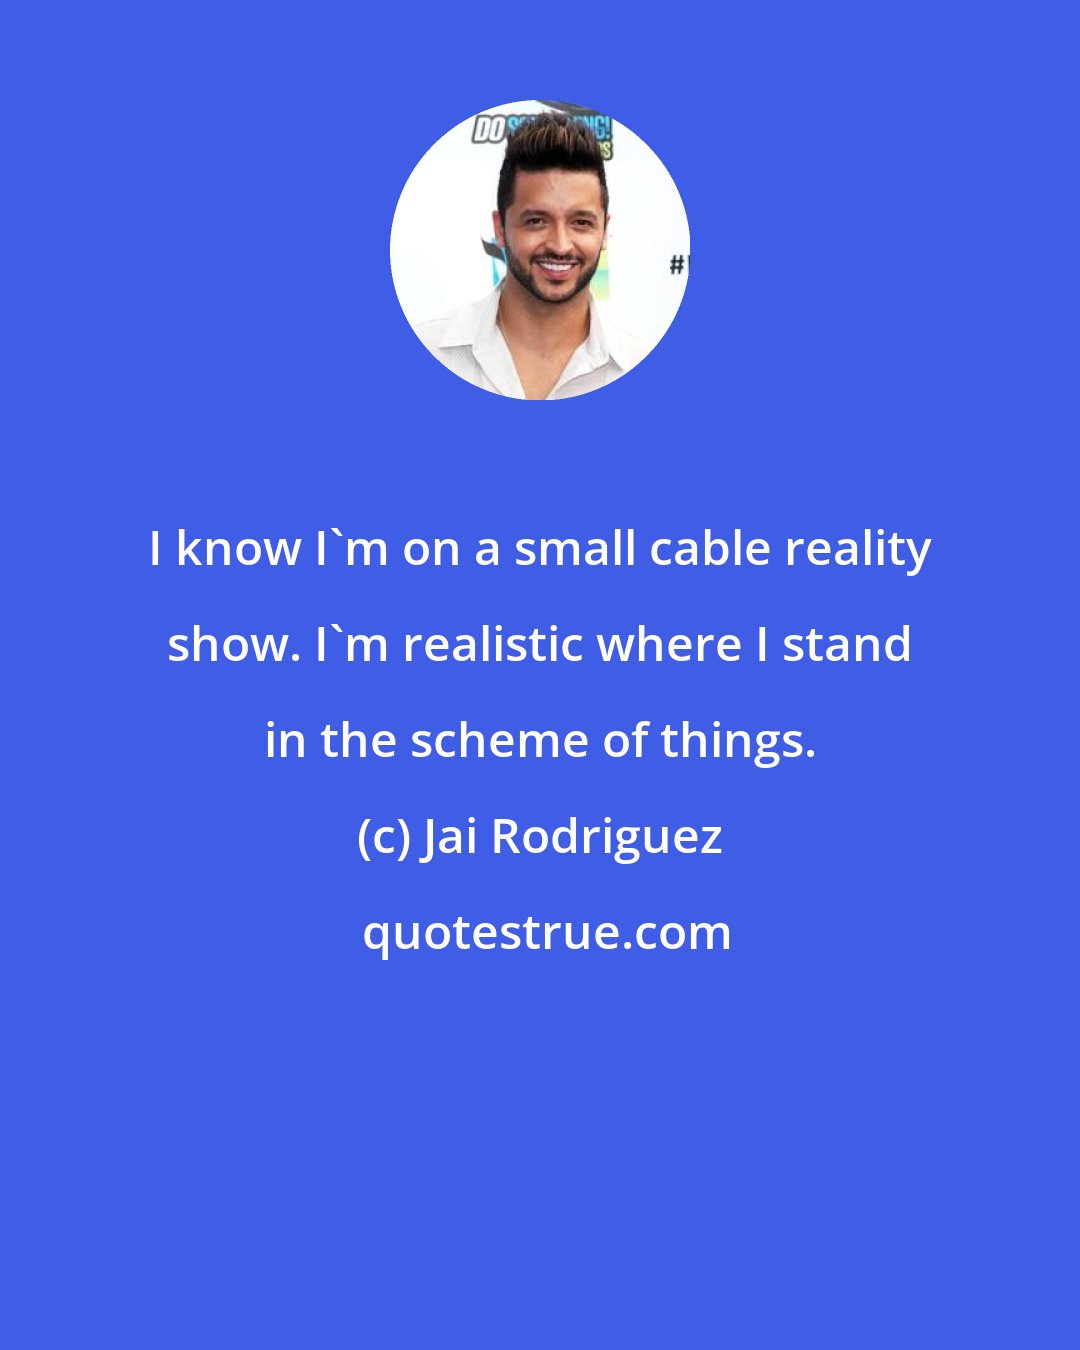 Jai Rodriguez: I know I'm on a small cable reality show. I'm realistic where I stand in the scheme of things.